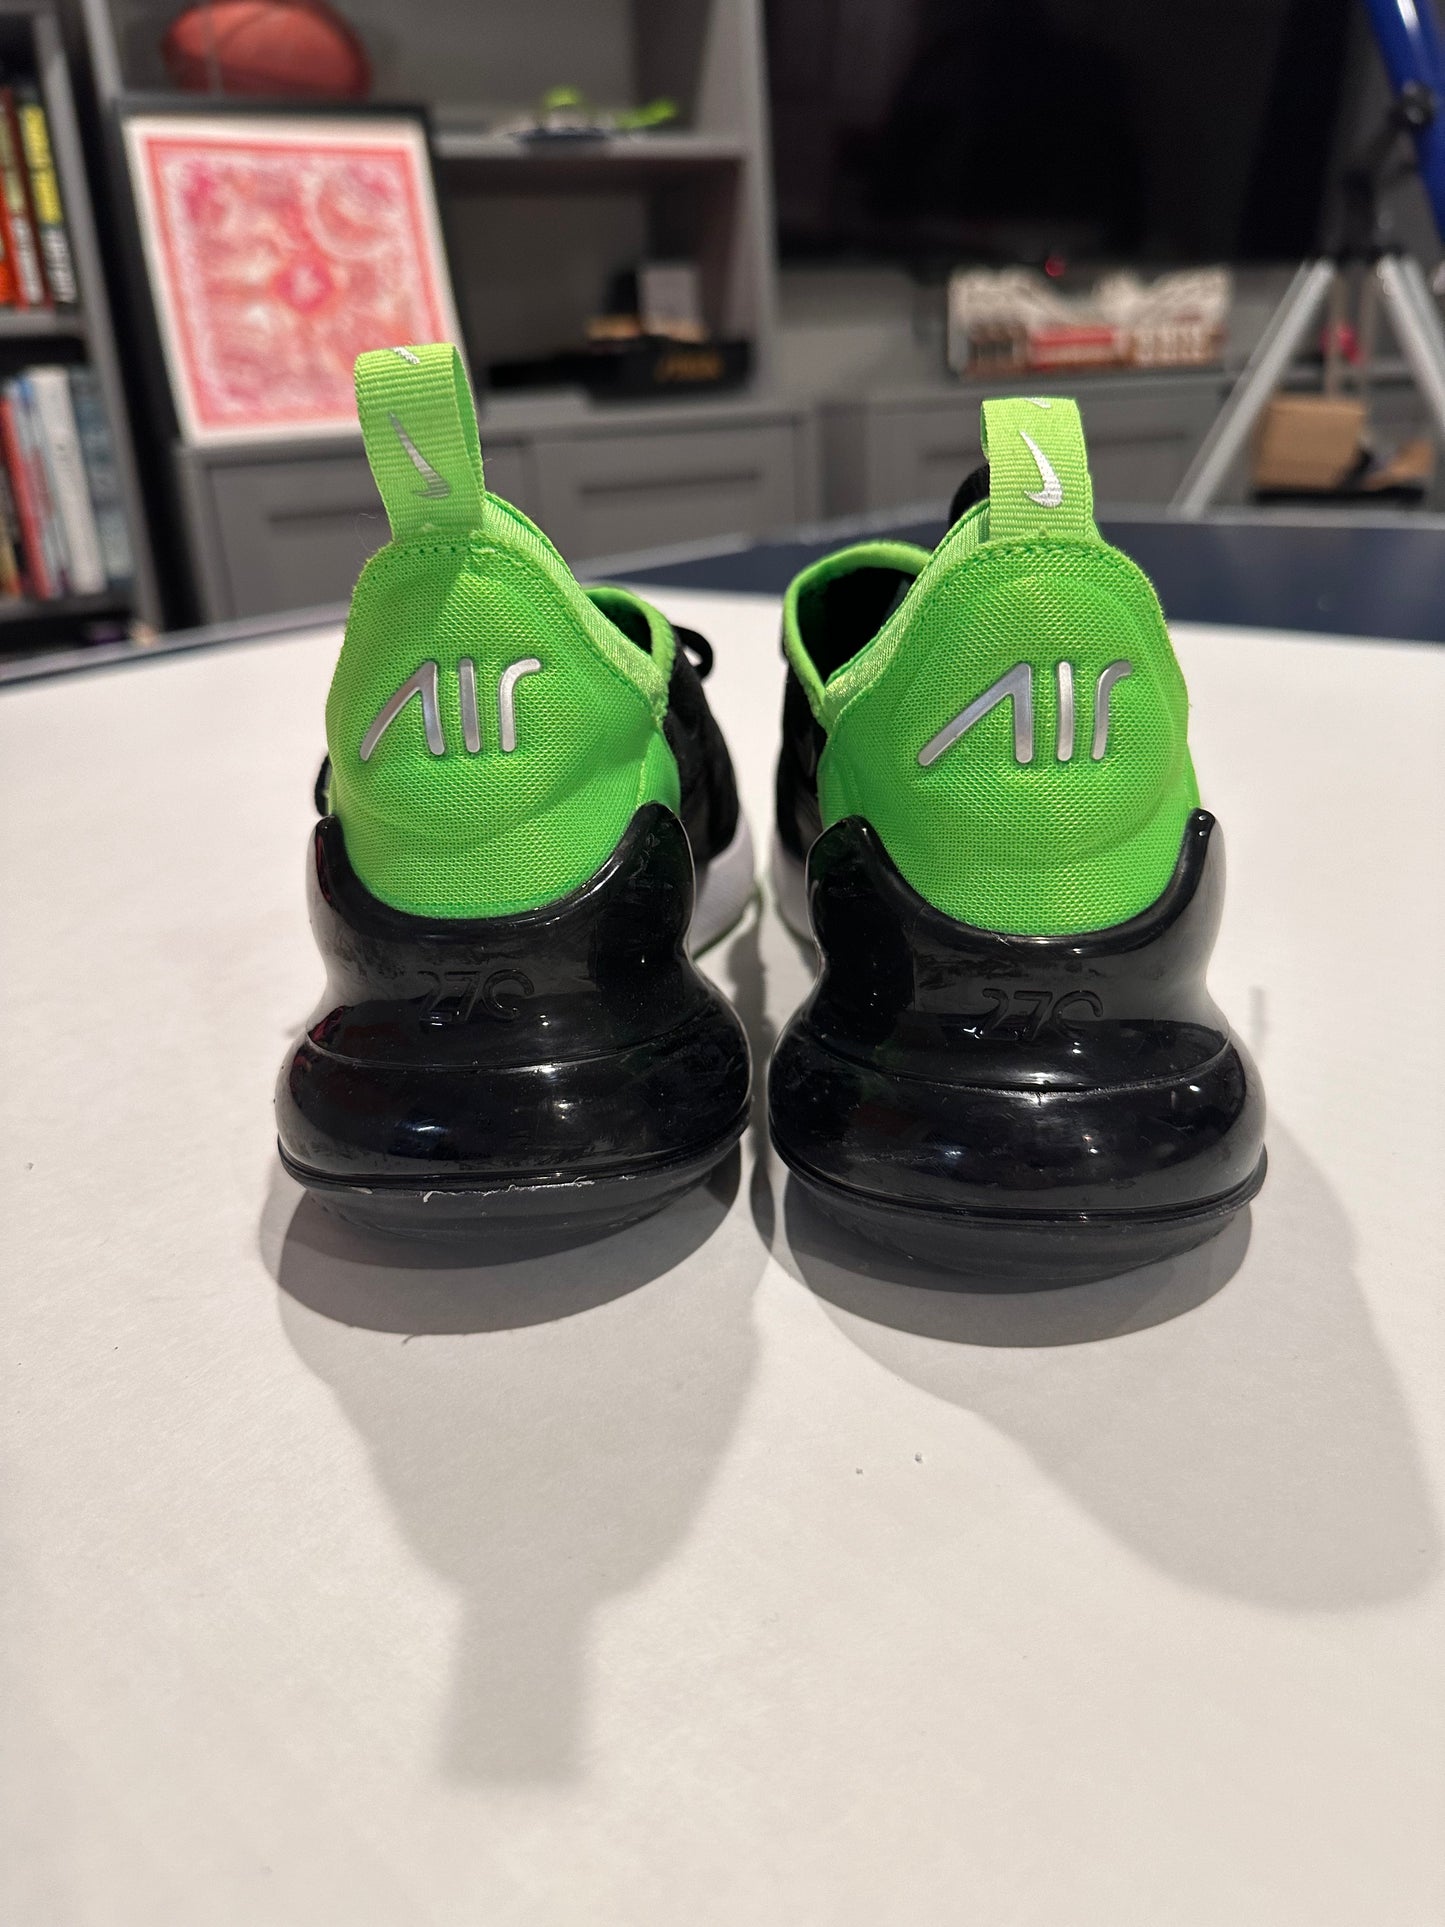 Nike Boys Air Max green and black size 7